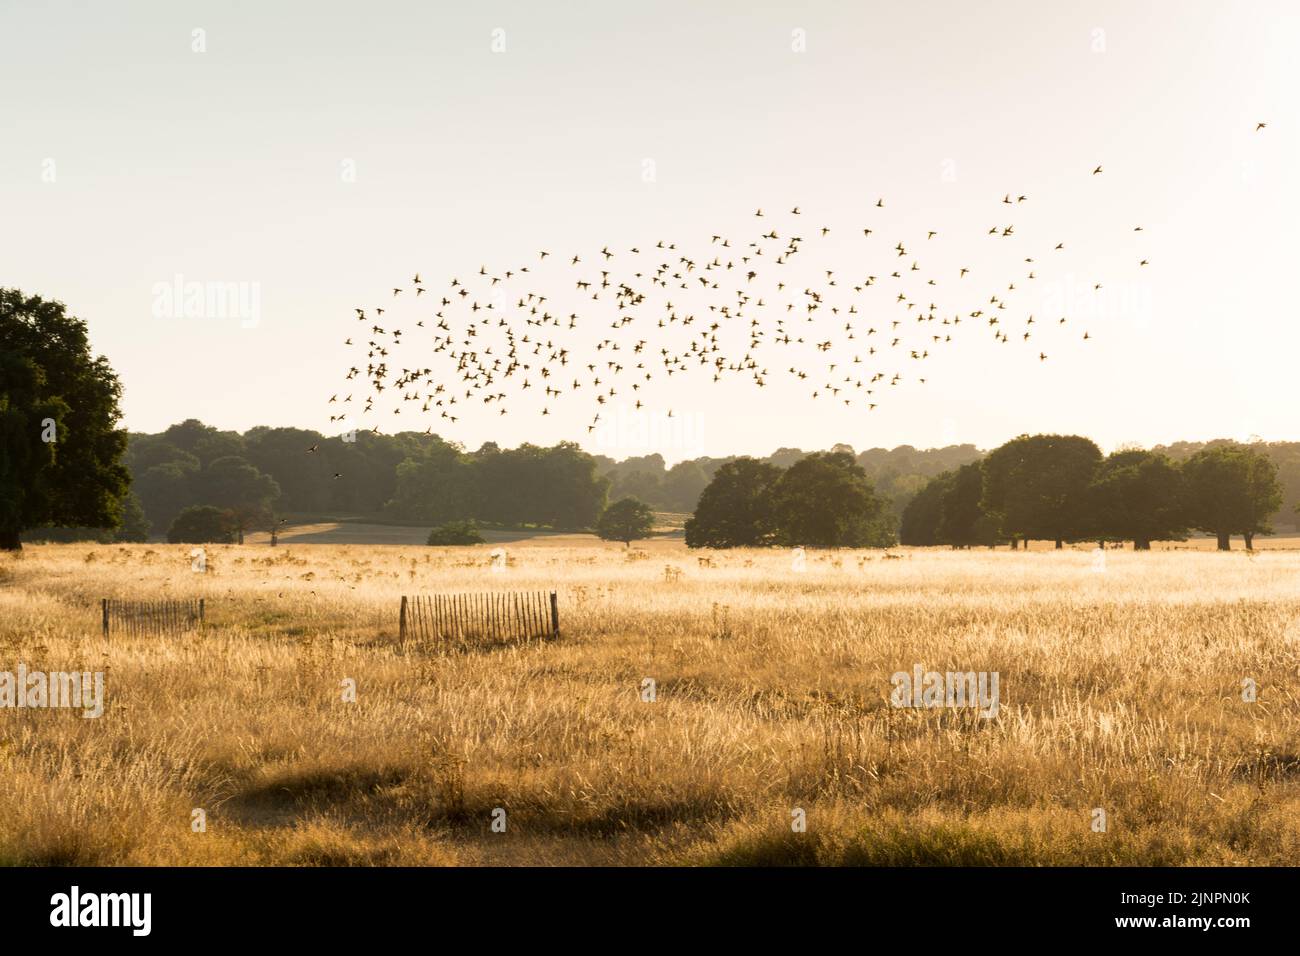 A murmuration of Common Starlings (Sturnus vulgaris) flying above a very scorched and bone dry Richmond Park, London, England, UK Stock Photo